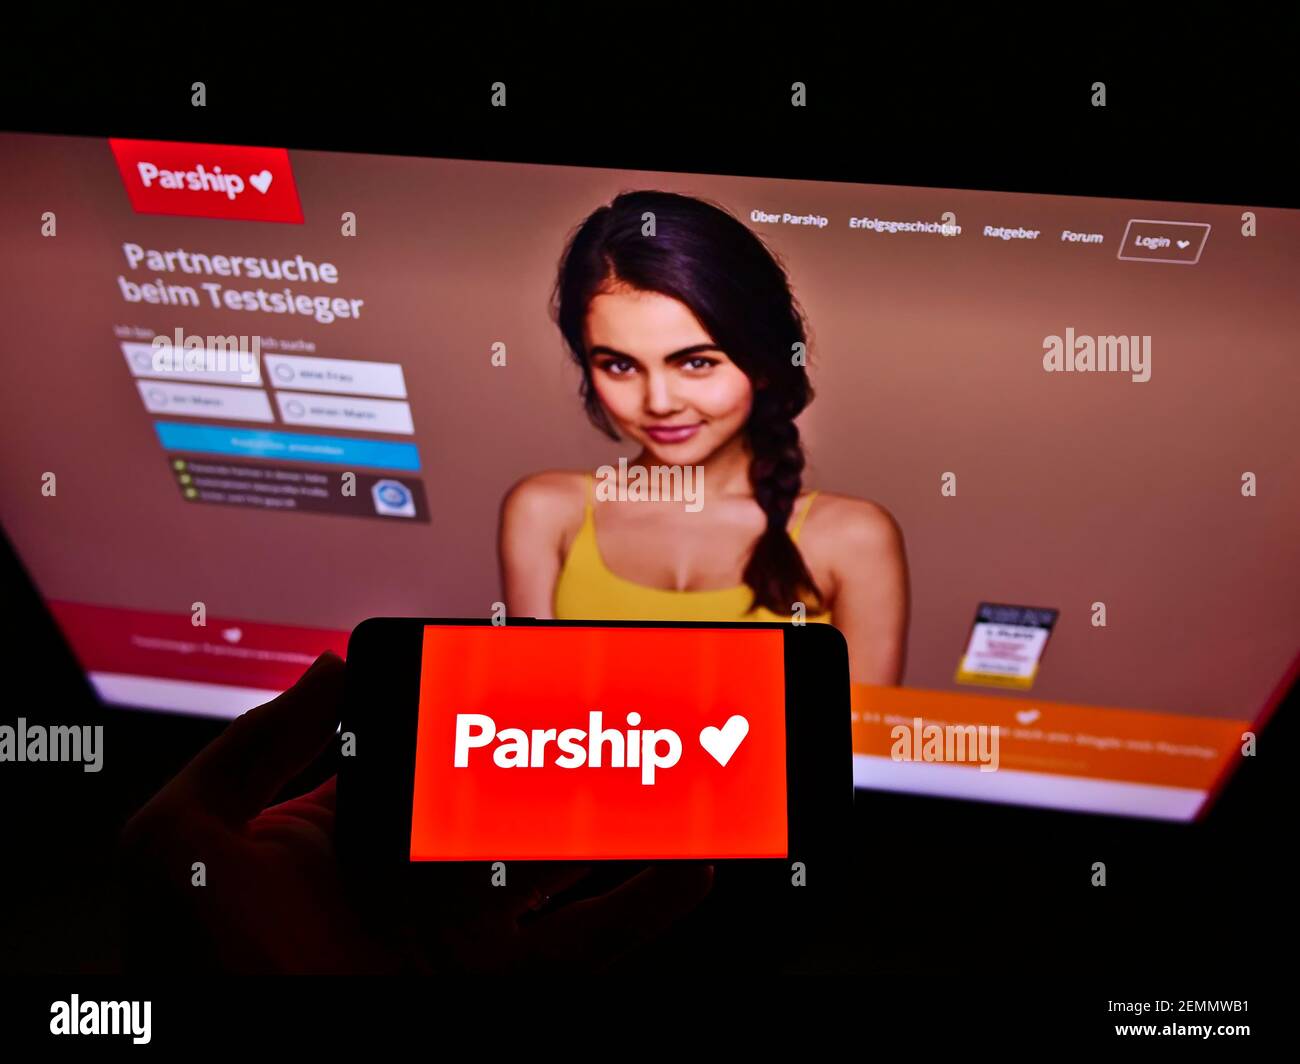 Person holding smartphone with logo of German online dating platform Parship (PE Digital GmbH) on screen in front of website. Focus on phone display. Stock Photo